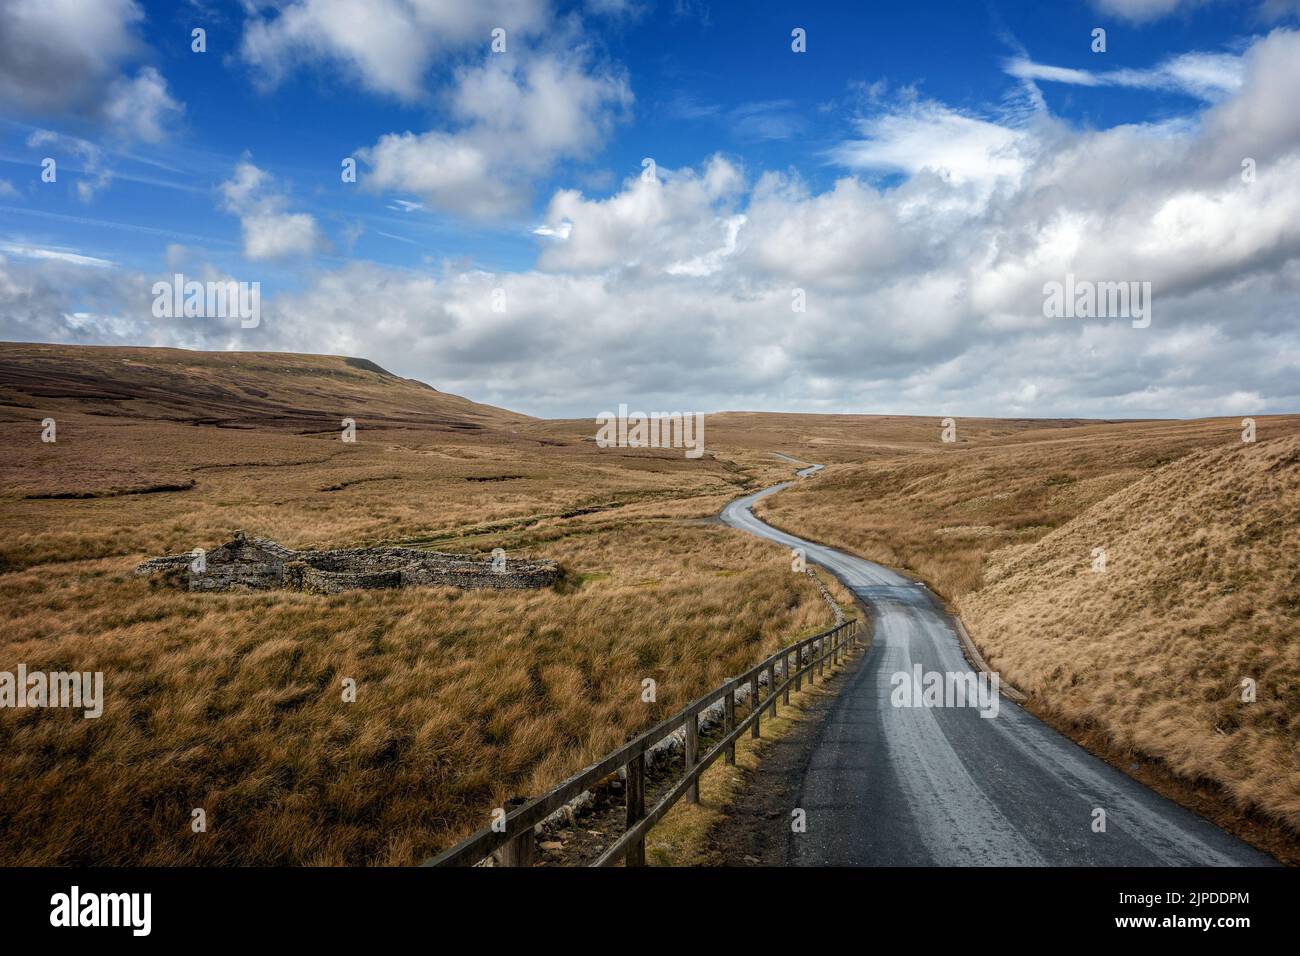 Landscape near Lamps Moss famous cycling hill on the B6270 road above Nateby, Yorkshire Dales National Park, England, UK Stock Photo